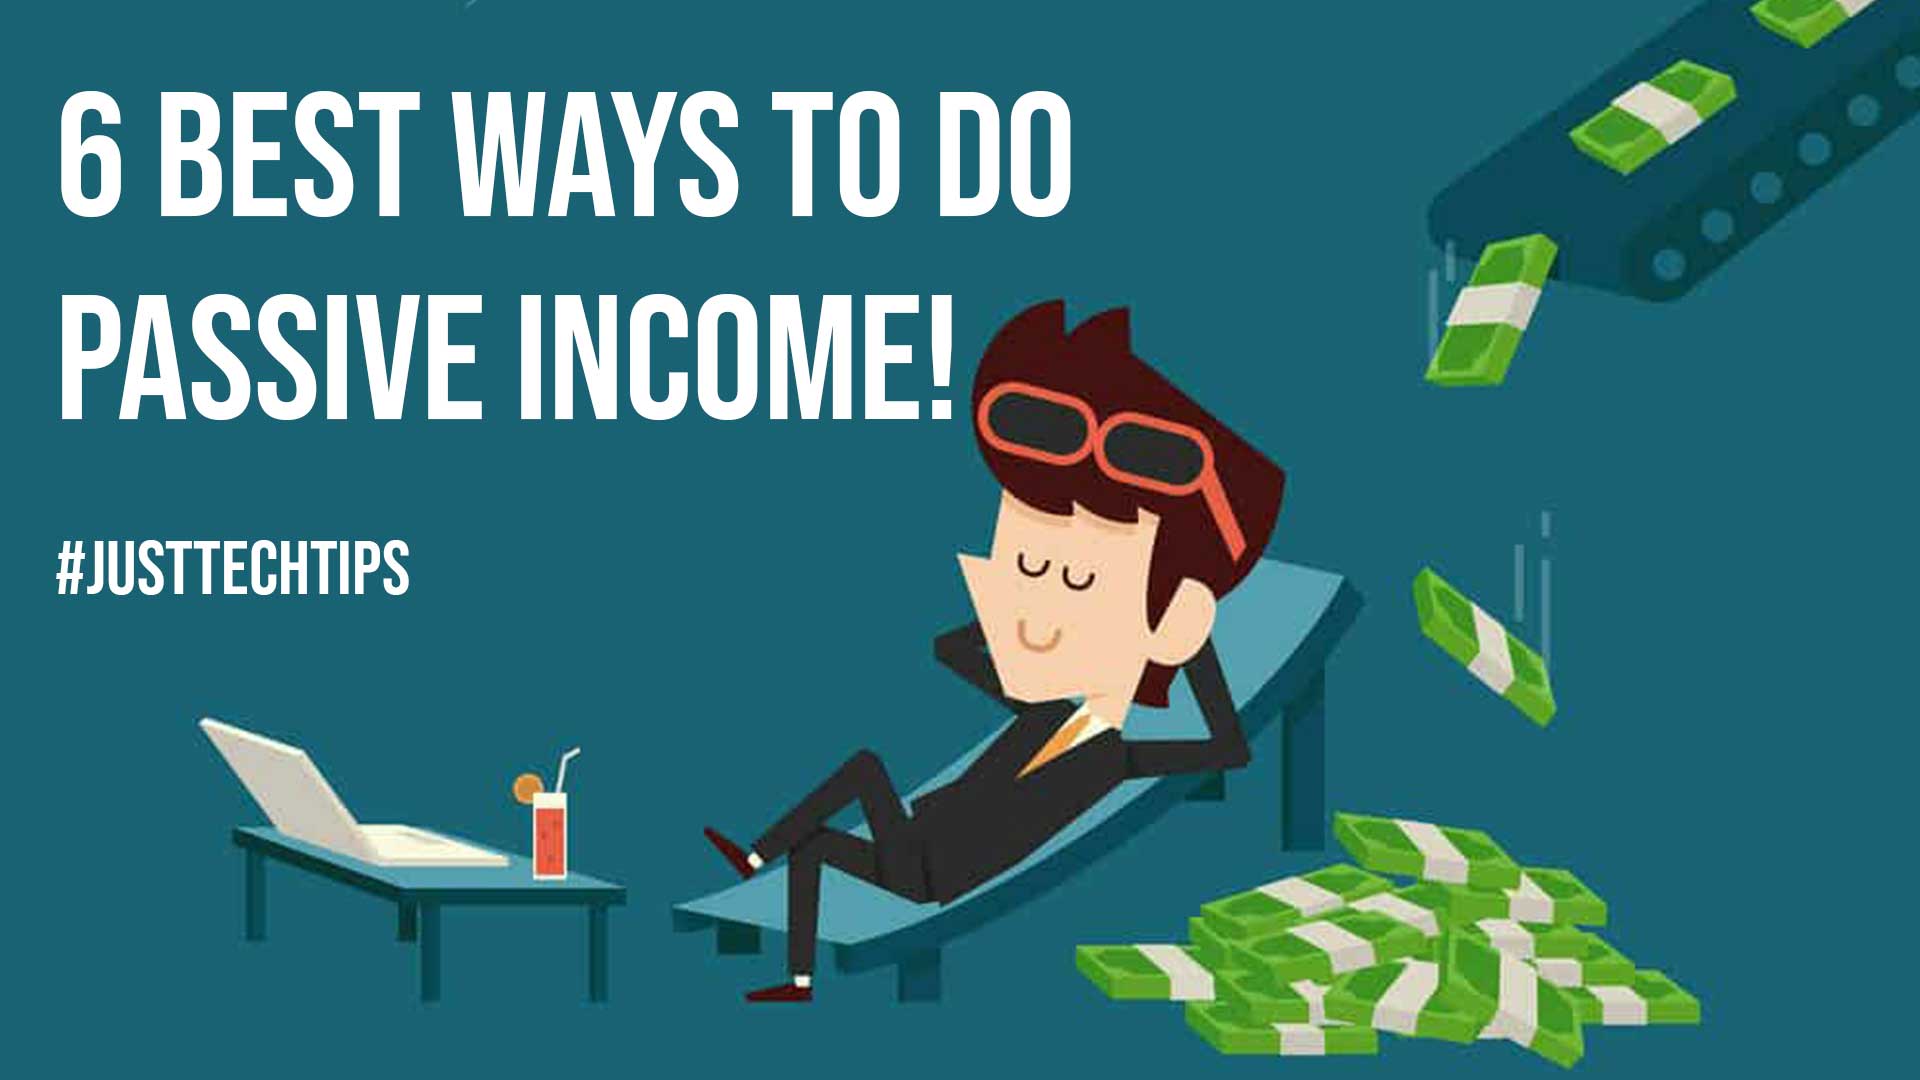 6 Best Ways to Do Passive Income